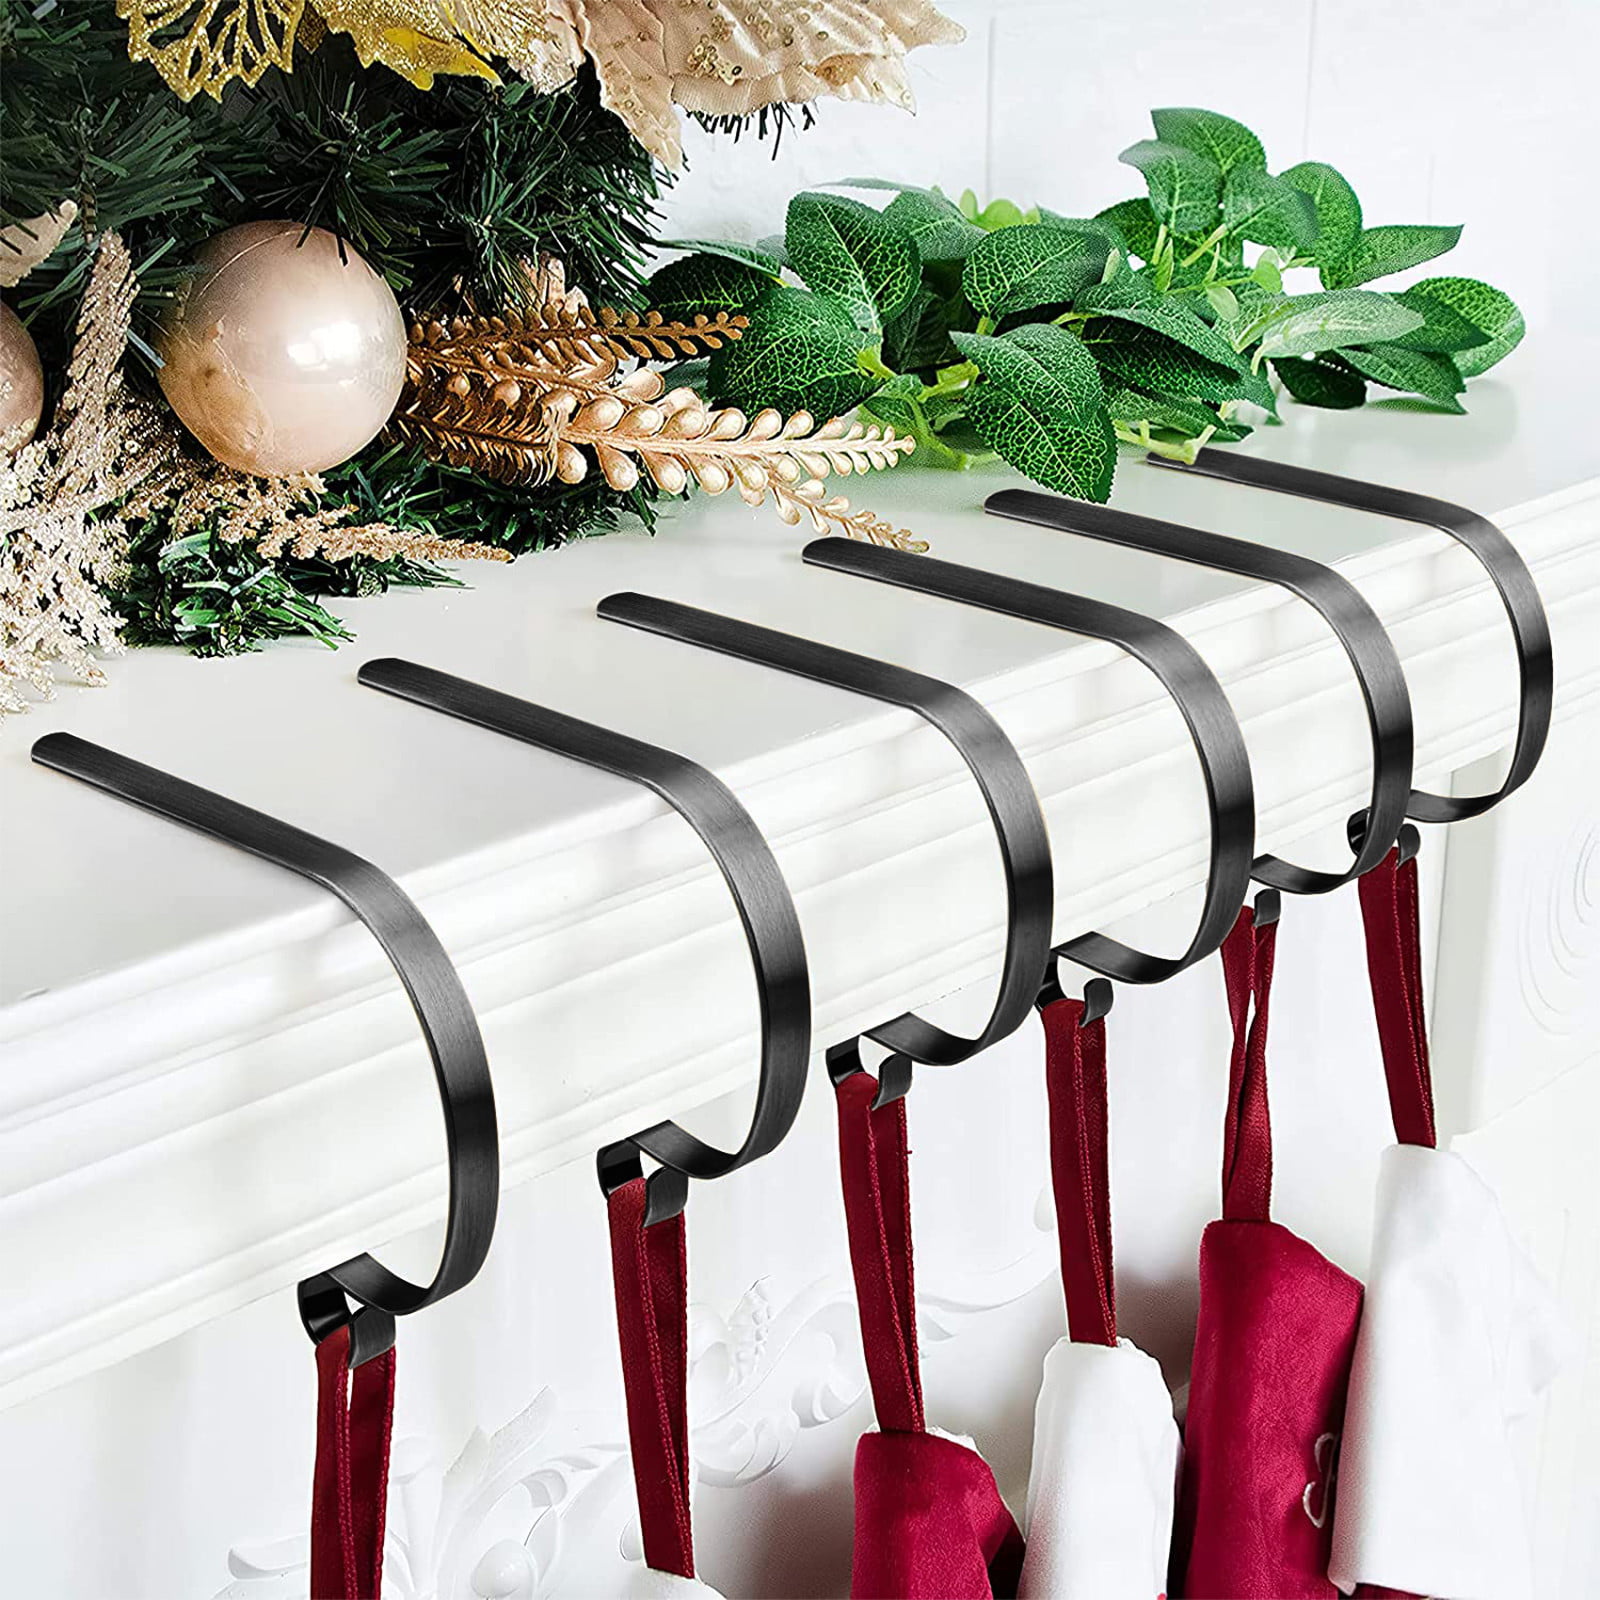 on-Slip Stocking Mantel Holders Hooks Hanger for Christmas Xmas Fireplace and Party Decoration Ehhyson 6Pcs Christmas Stockings Holders Mantel Hooks Hanger